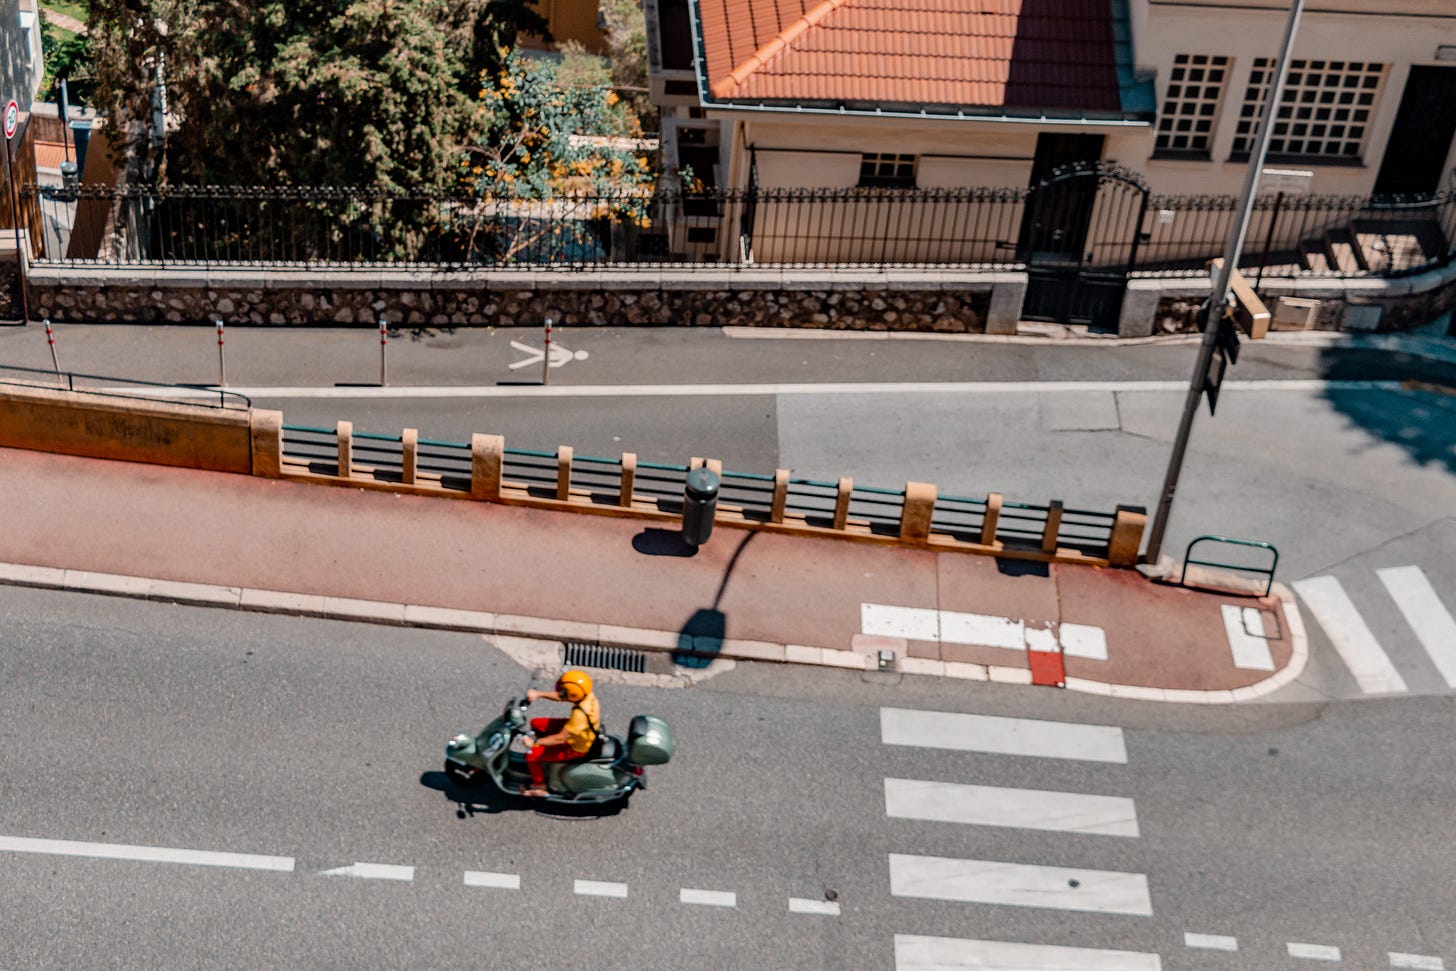 A man riding on a scooter in Monaco: A photo by David Elikwu